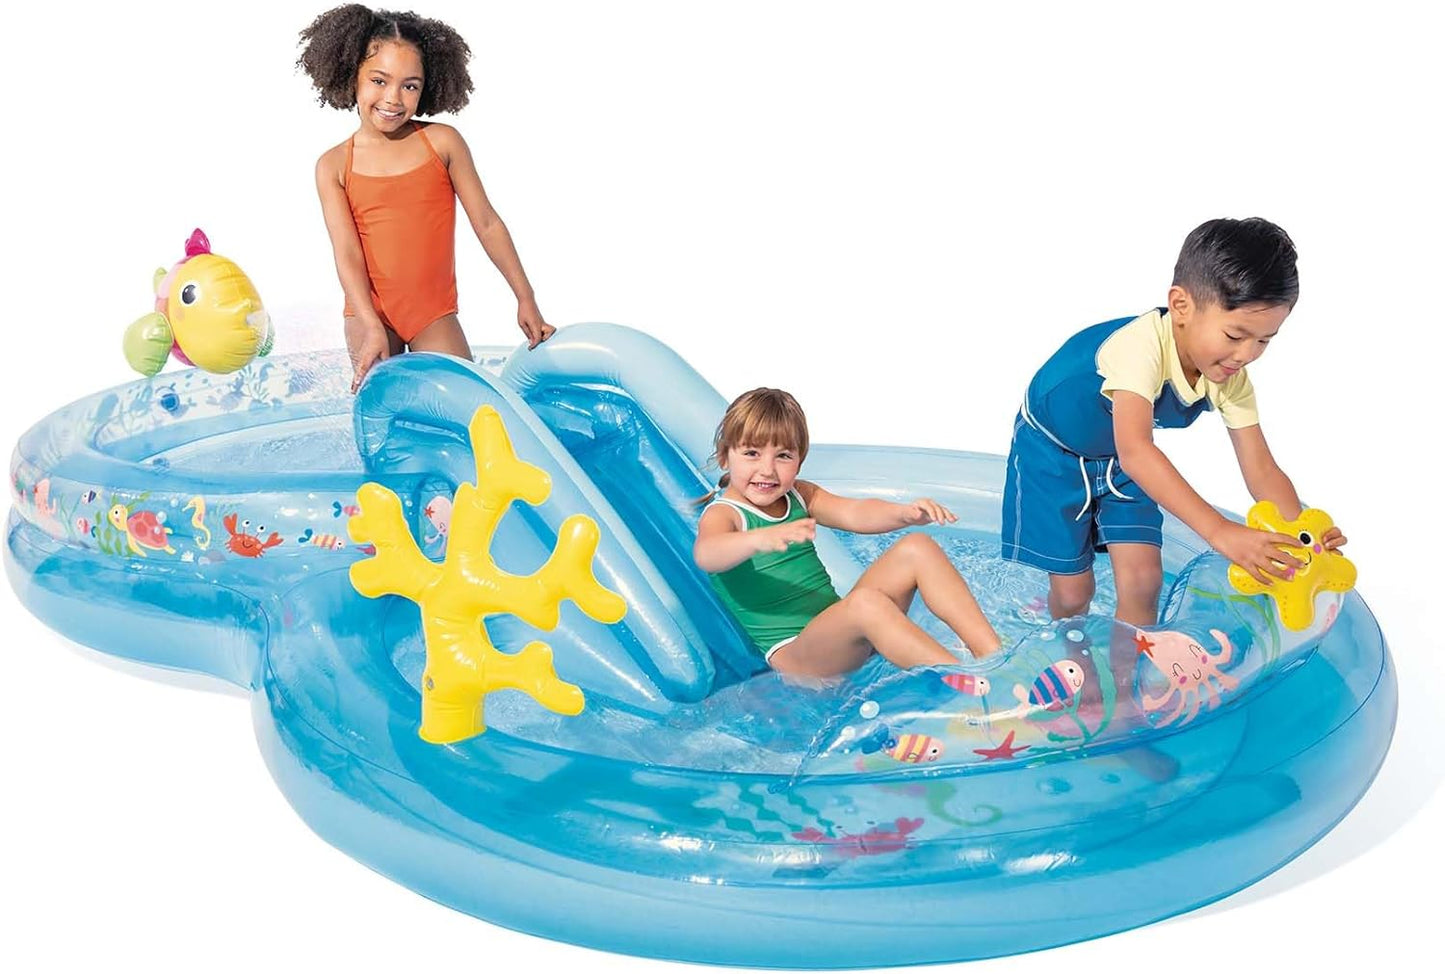 Intex Under The Sea Play Center, Inflated Size: 3.10m x 1.93m x 71cm